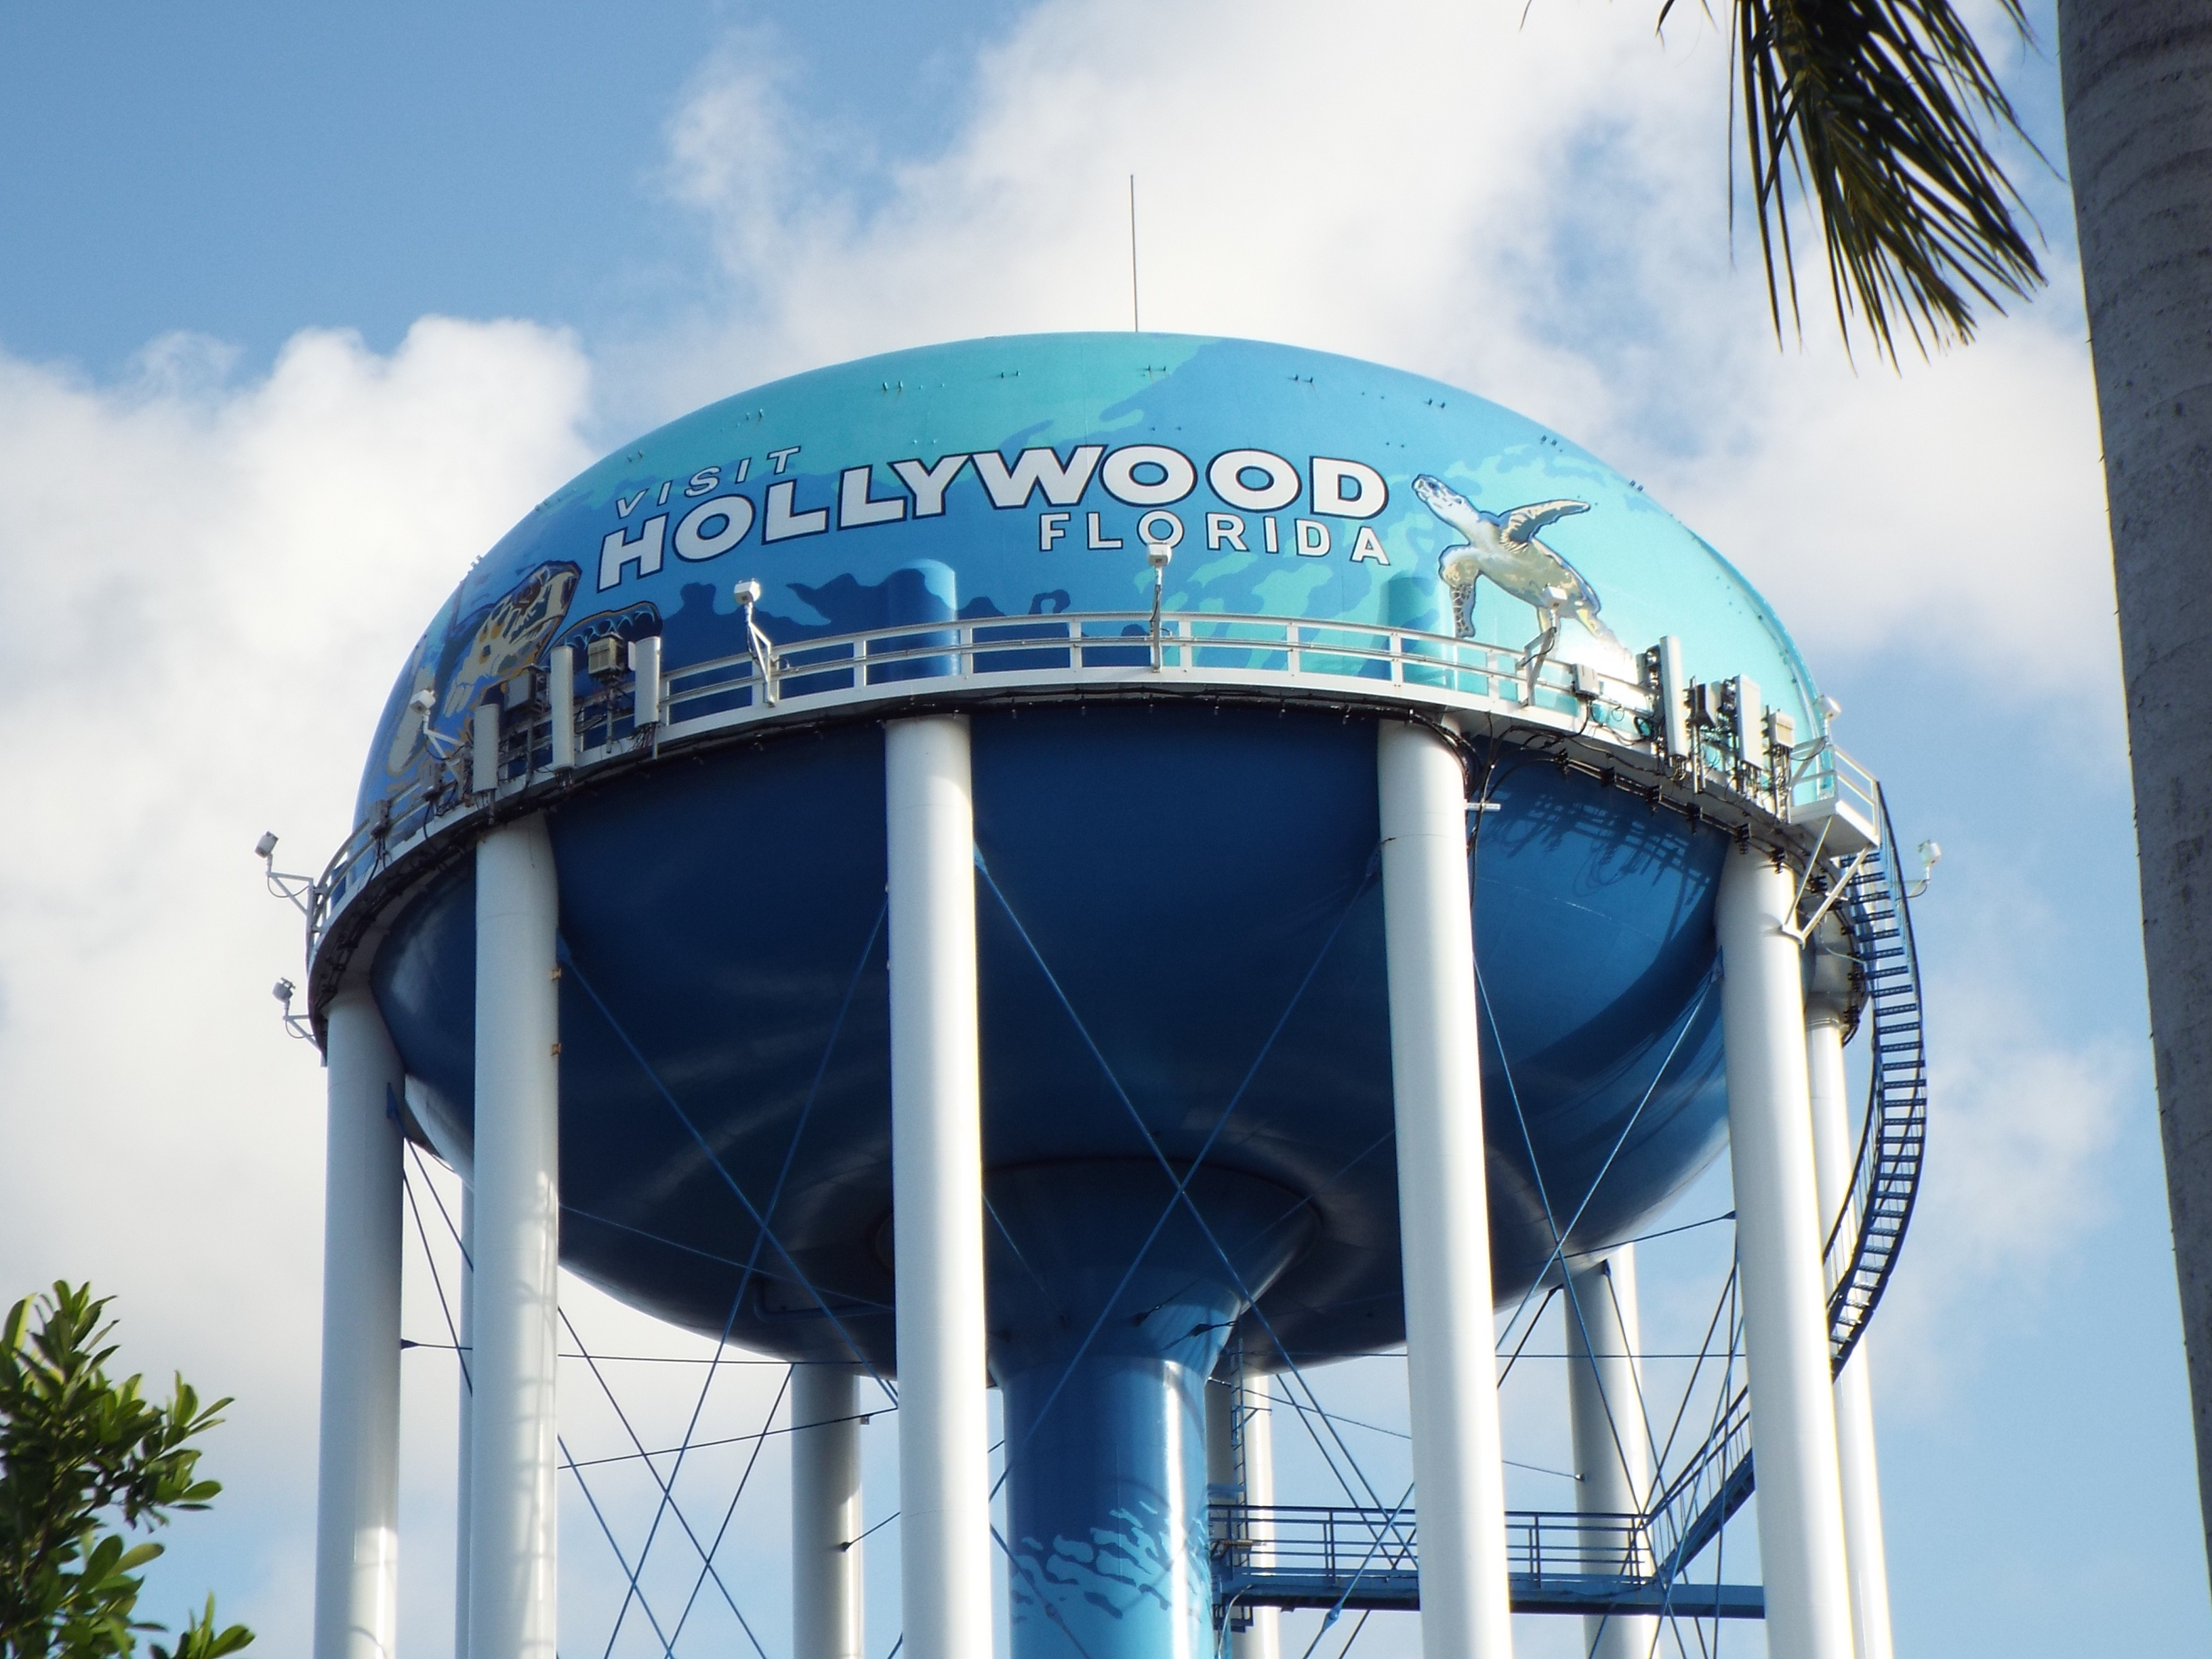 Oakland movie theater hollywood fl